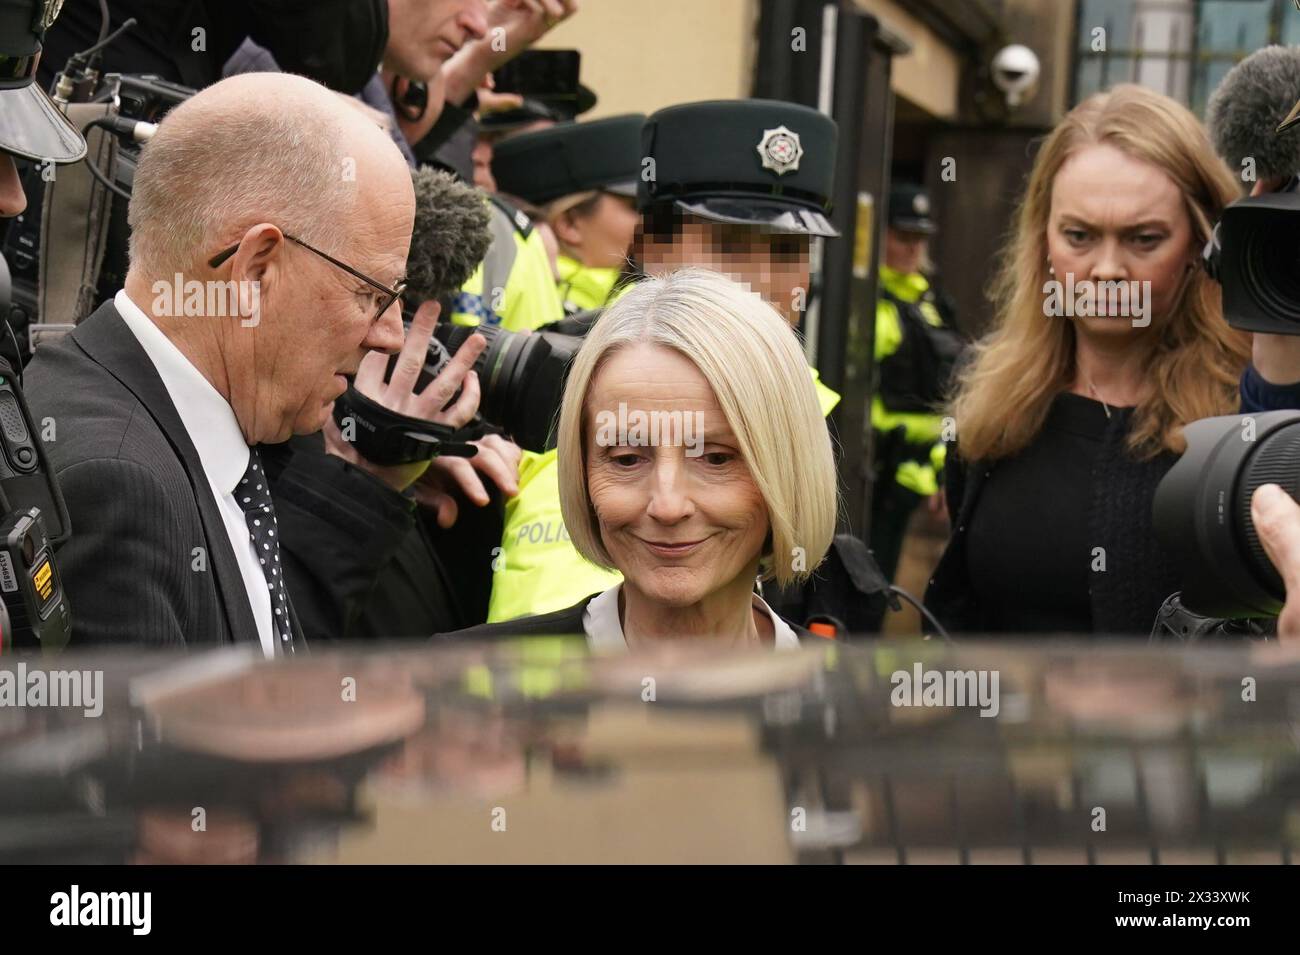 RETRANSMITTING AMENDING TOPIC EDITORS NOTE IMAGE PIXELLATED BY THE PA PICTURE DESK FOR THE PROTECTION OF OFFICERS OF THE PSNI Sir Jeffrey Donaldson's wife, Lady Eleanor Donaldson leaves Newry Magistrates' Court, after appearing to face charges in relation to the same police investigation as her husband, the former DUP leader, who appeared in court charged with rape and a number of other historical sex offences. Picture date: Wednesday April 24, 2024. Stock Photo